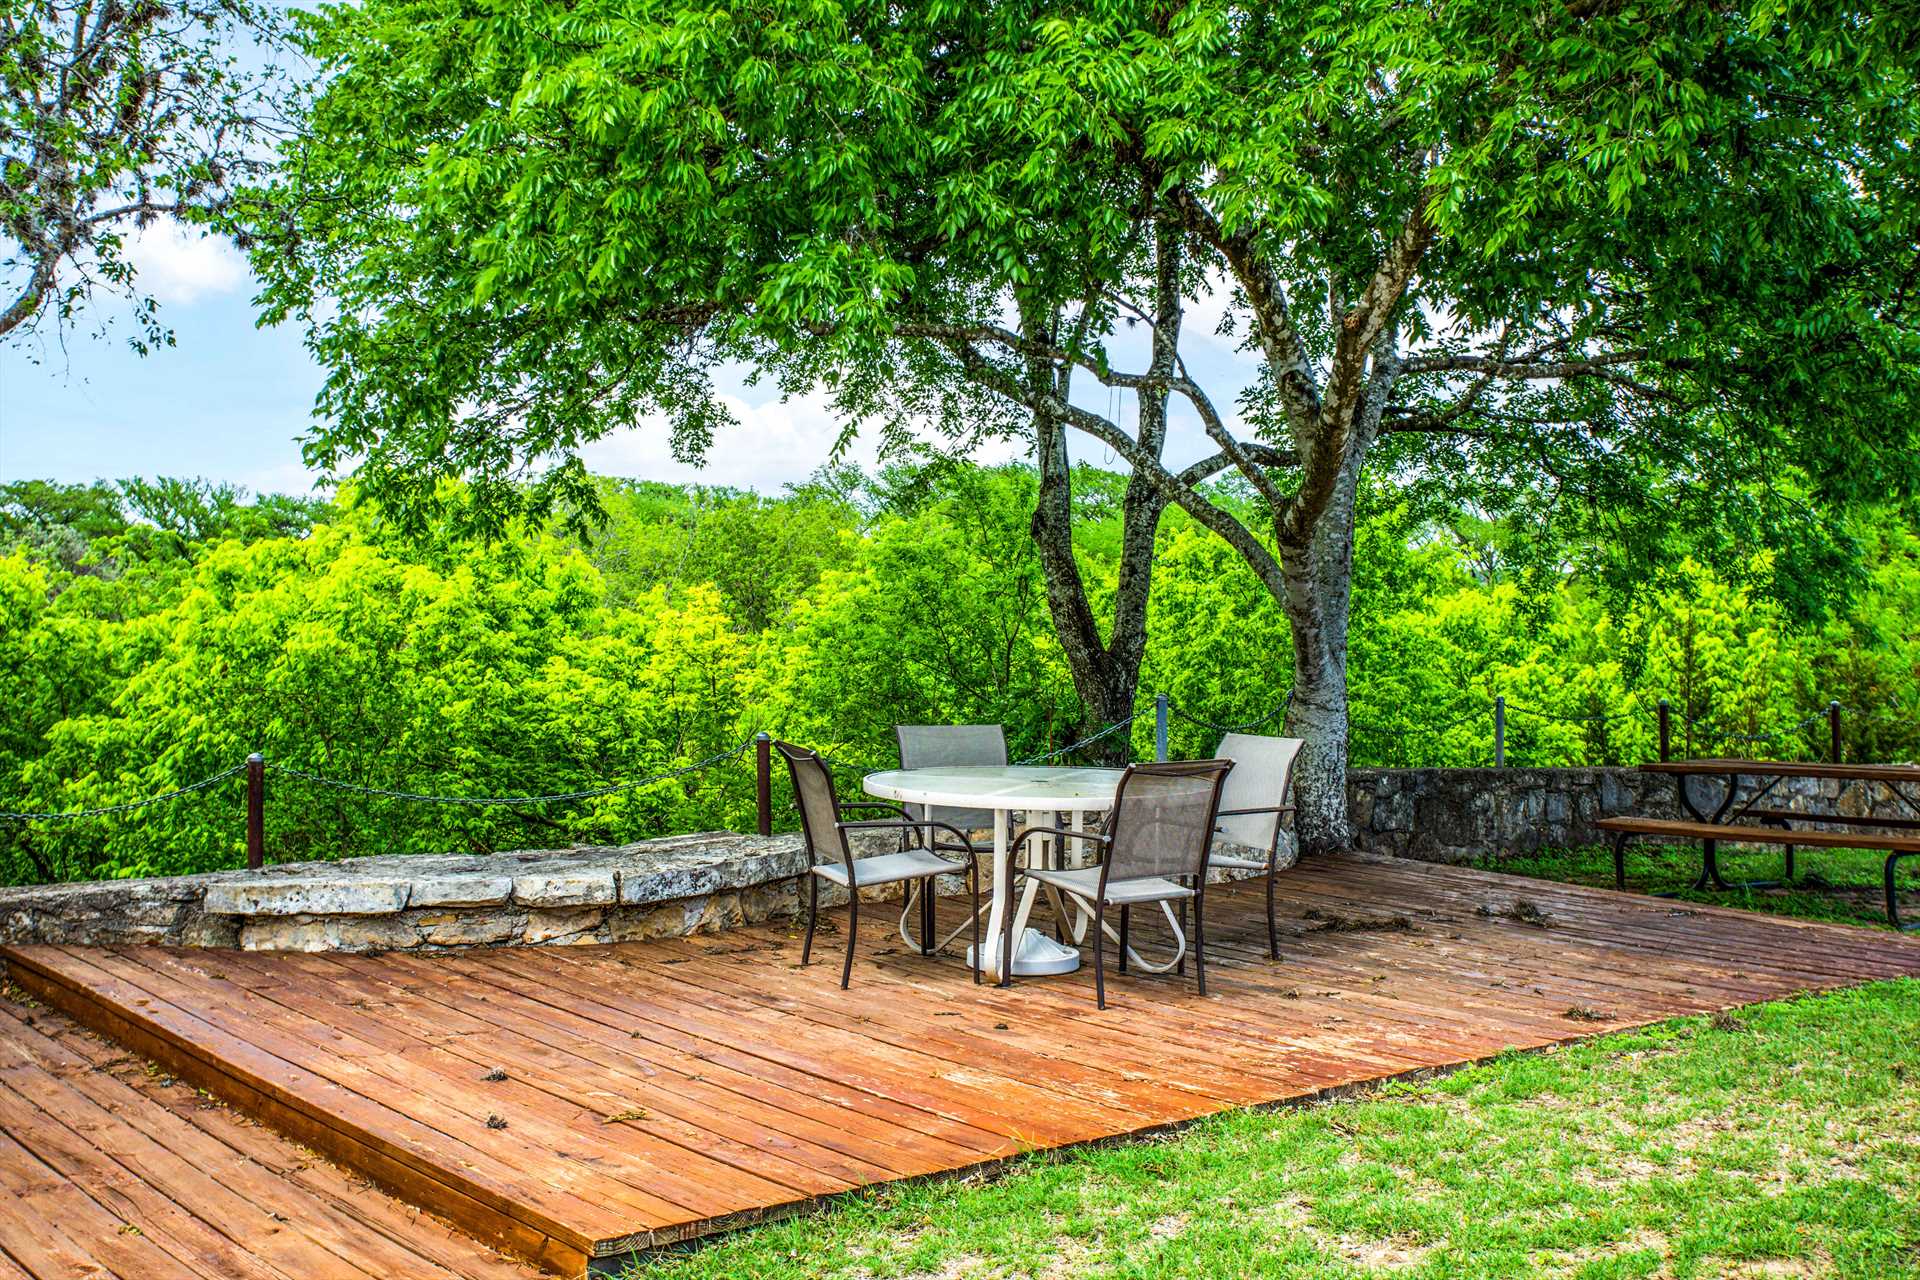                                                 This naturally-shaded patio gives you an inspiring and elevated view of the surrounding Hill Country! A tip for our visitors: it's also a great photo spot!